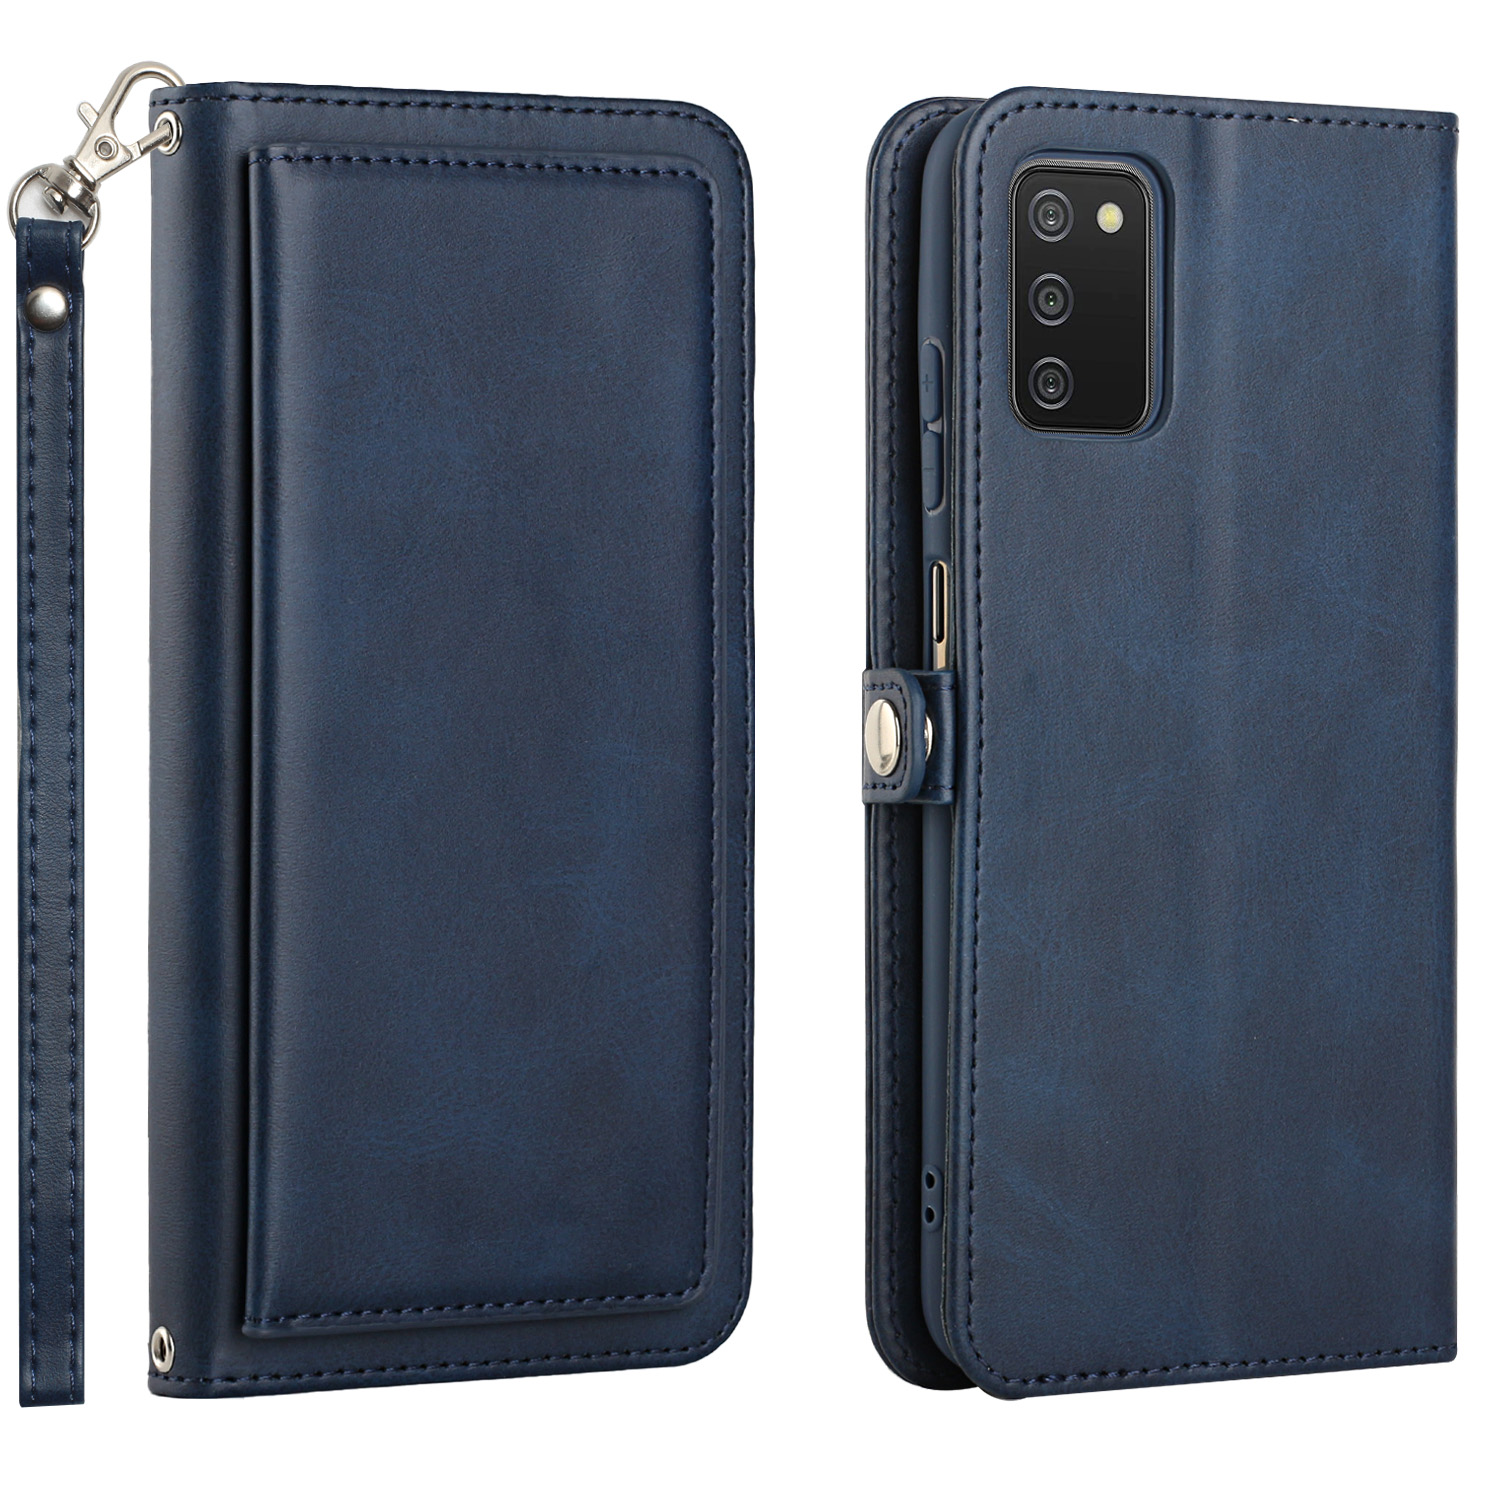 Premium PU Leather Folio WALLET Front Cover Case for Galaxy A02s (Blue)